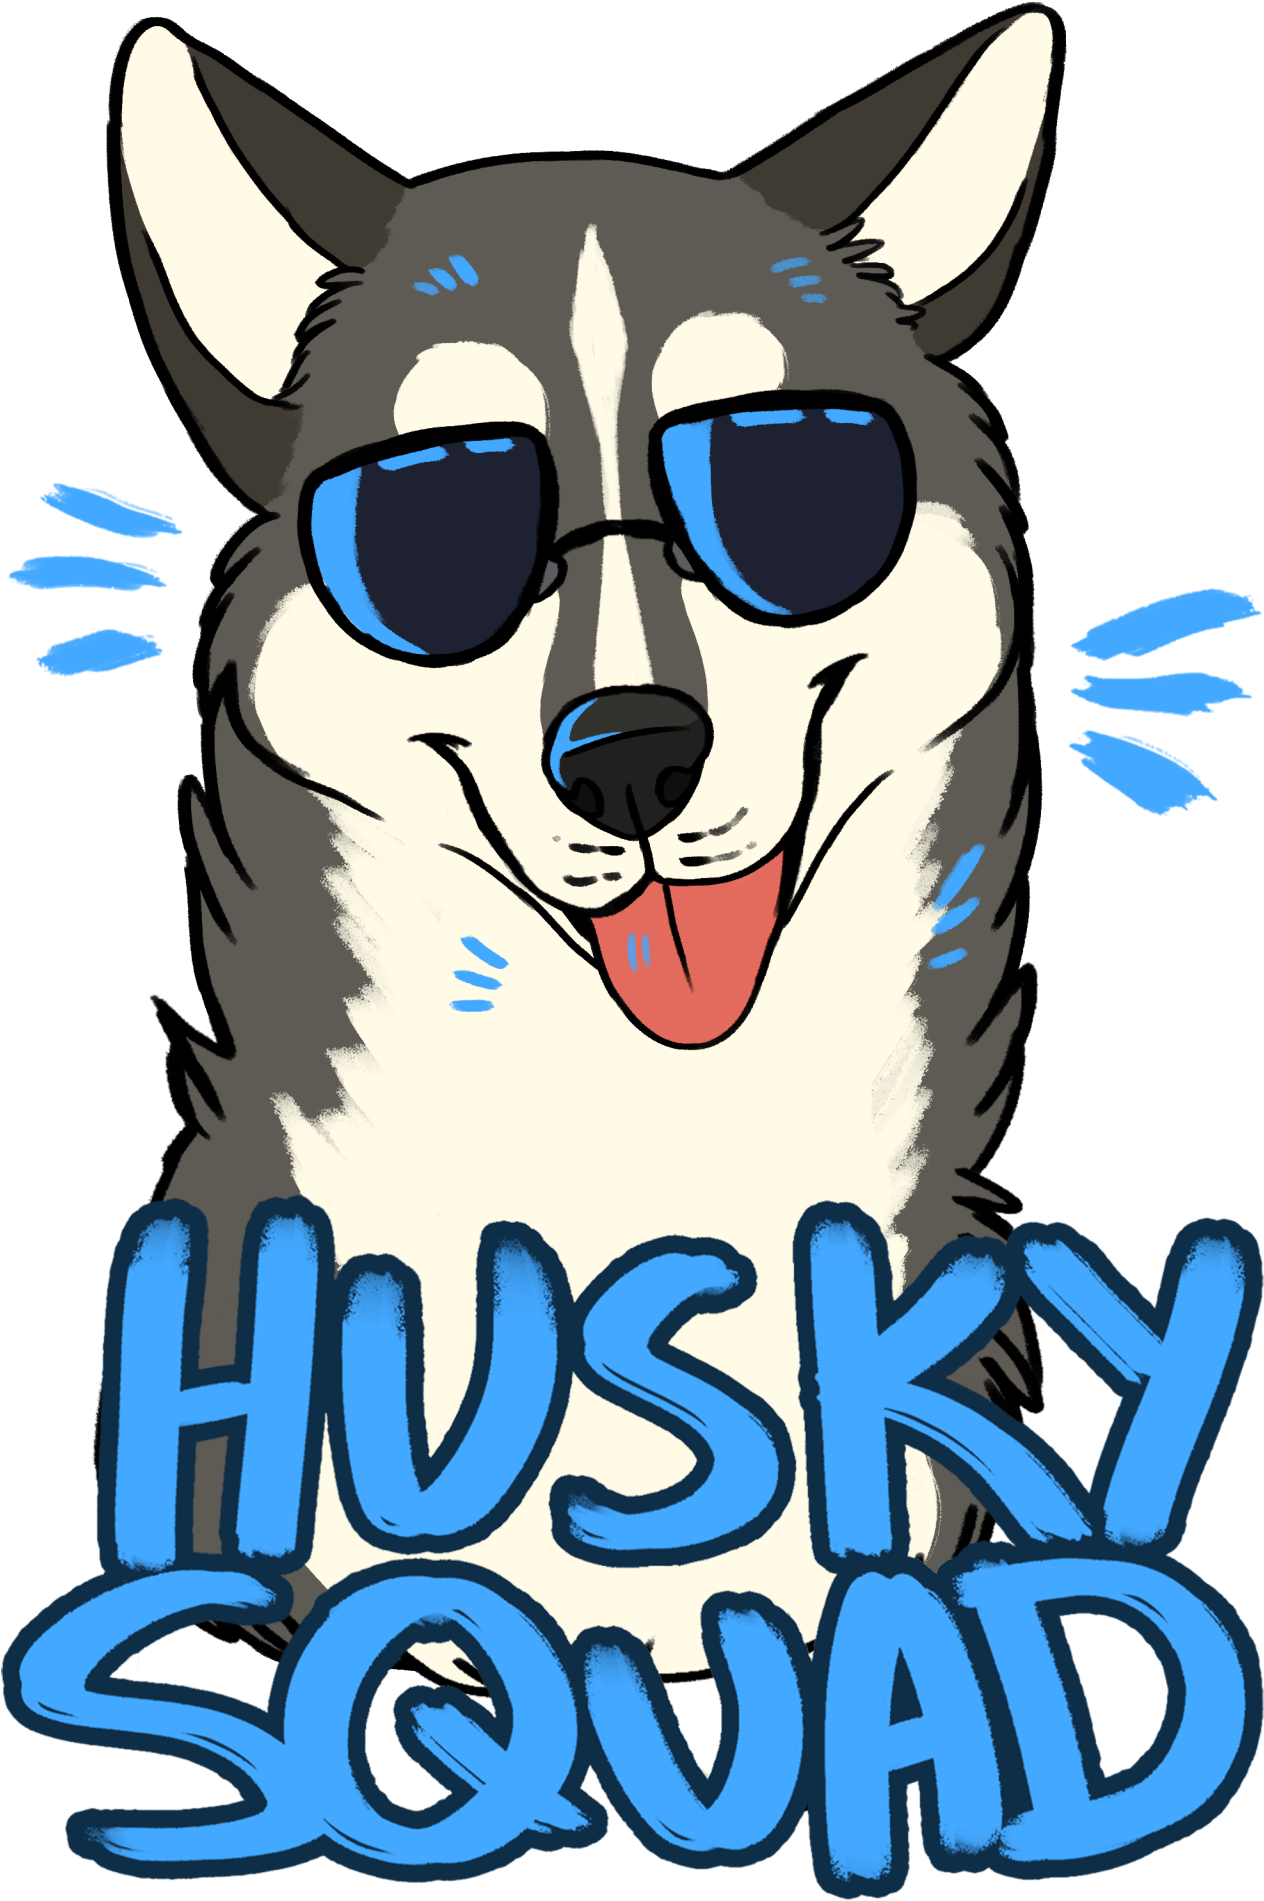 Updated Colors For The Husky Squad Merch Available - Husky Tshirt (1280x1920)